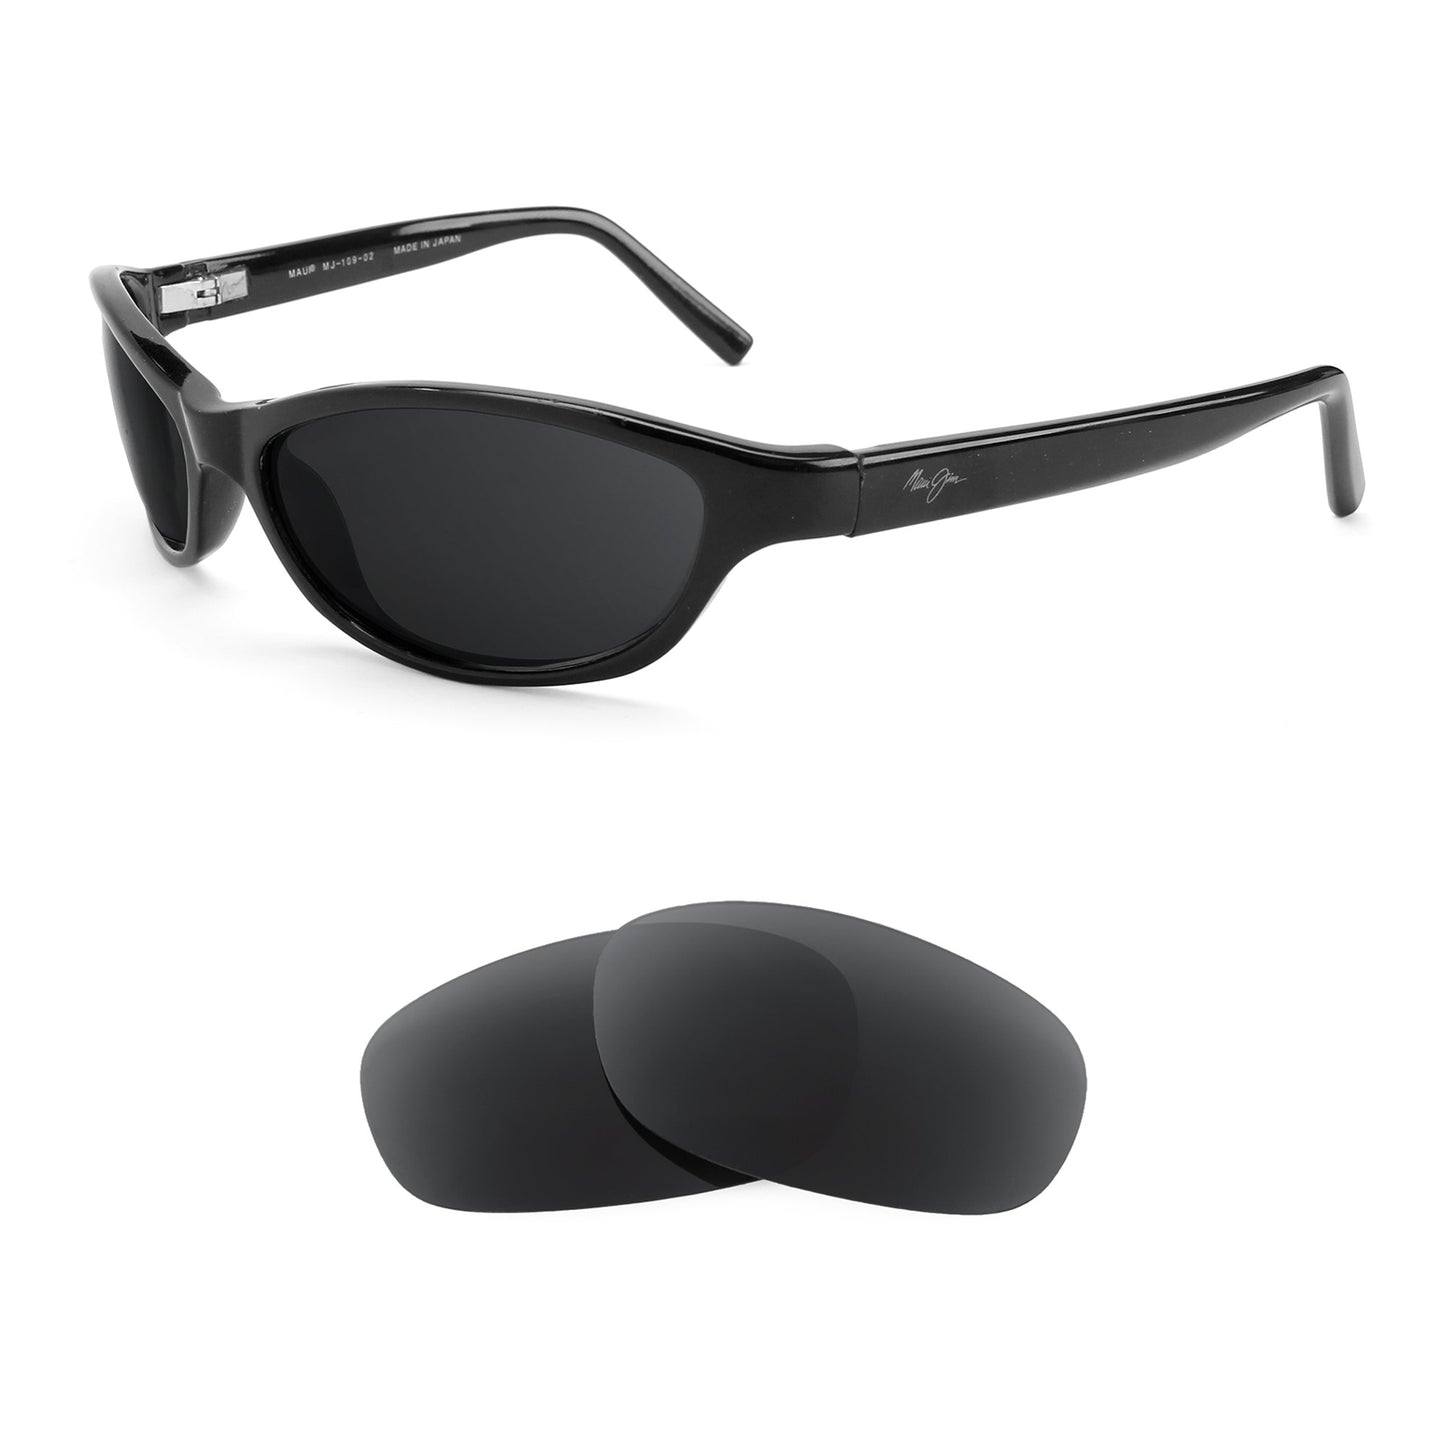 Maui Jim Wavemaker MJ109 sunglasses with replacement lenses